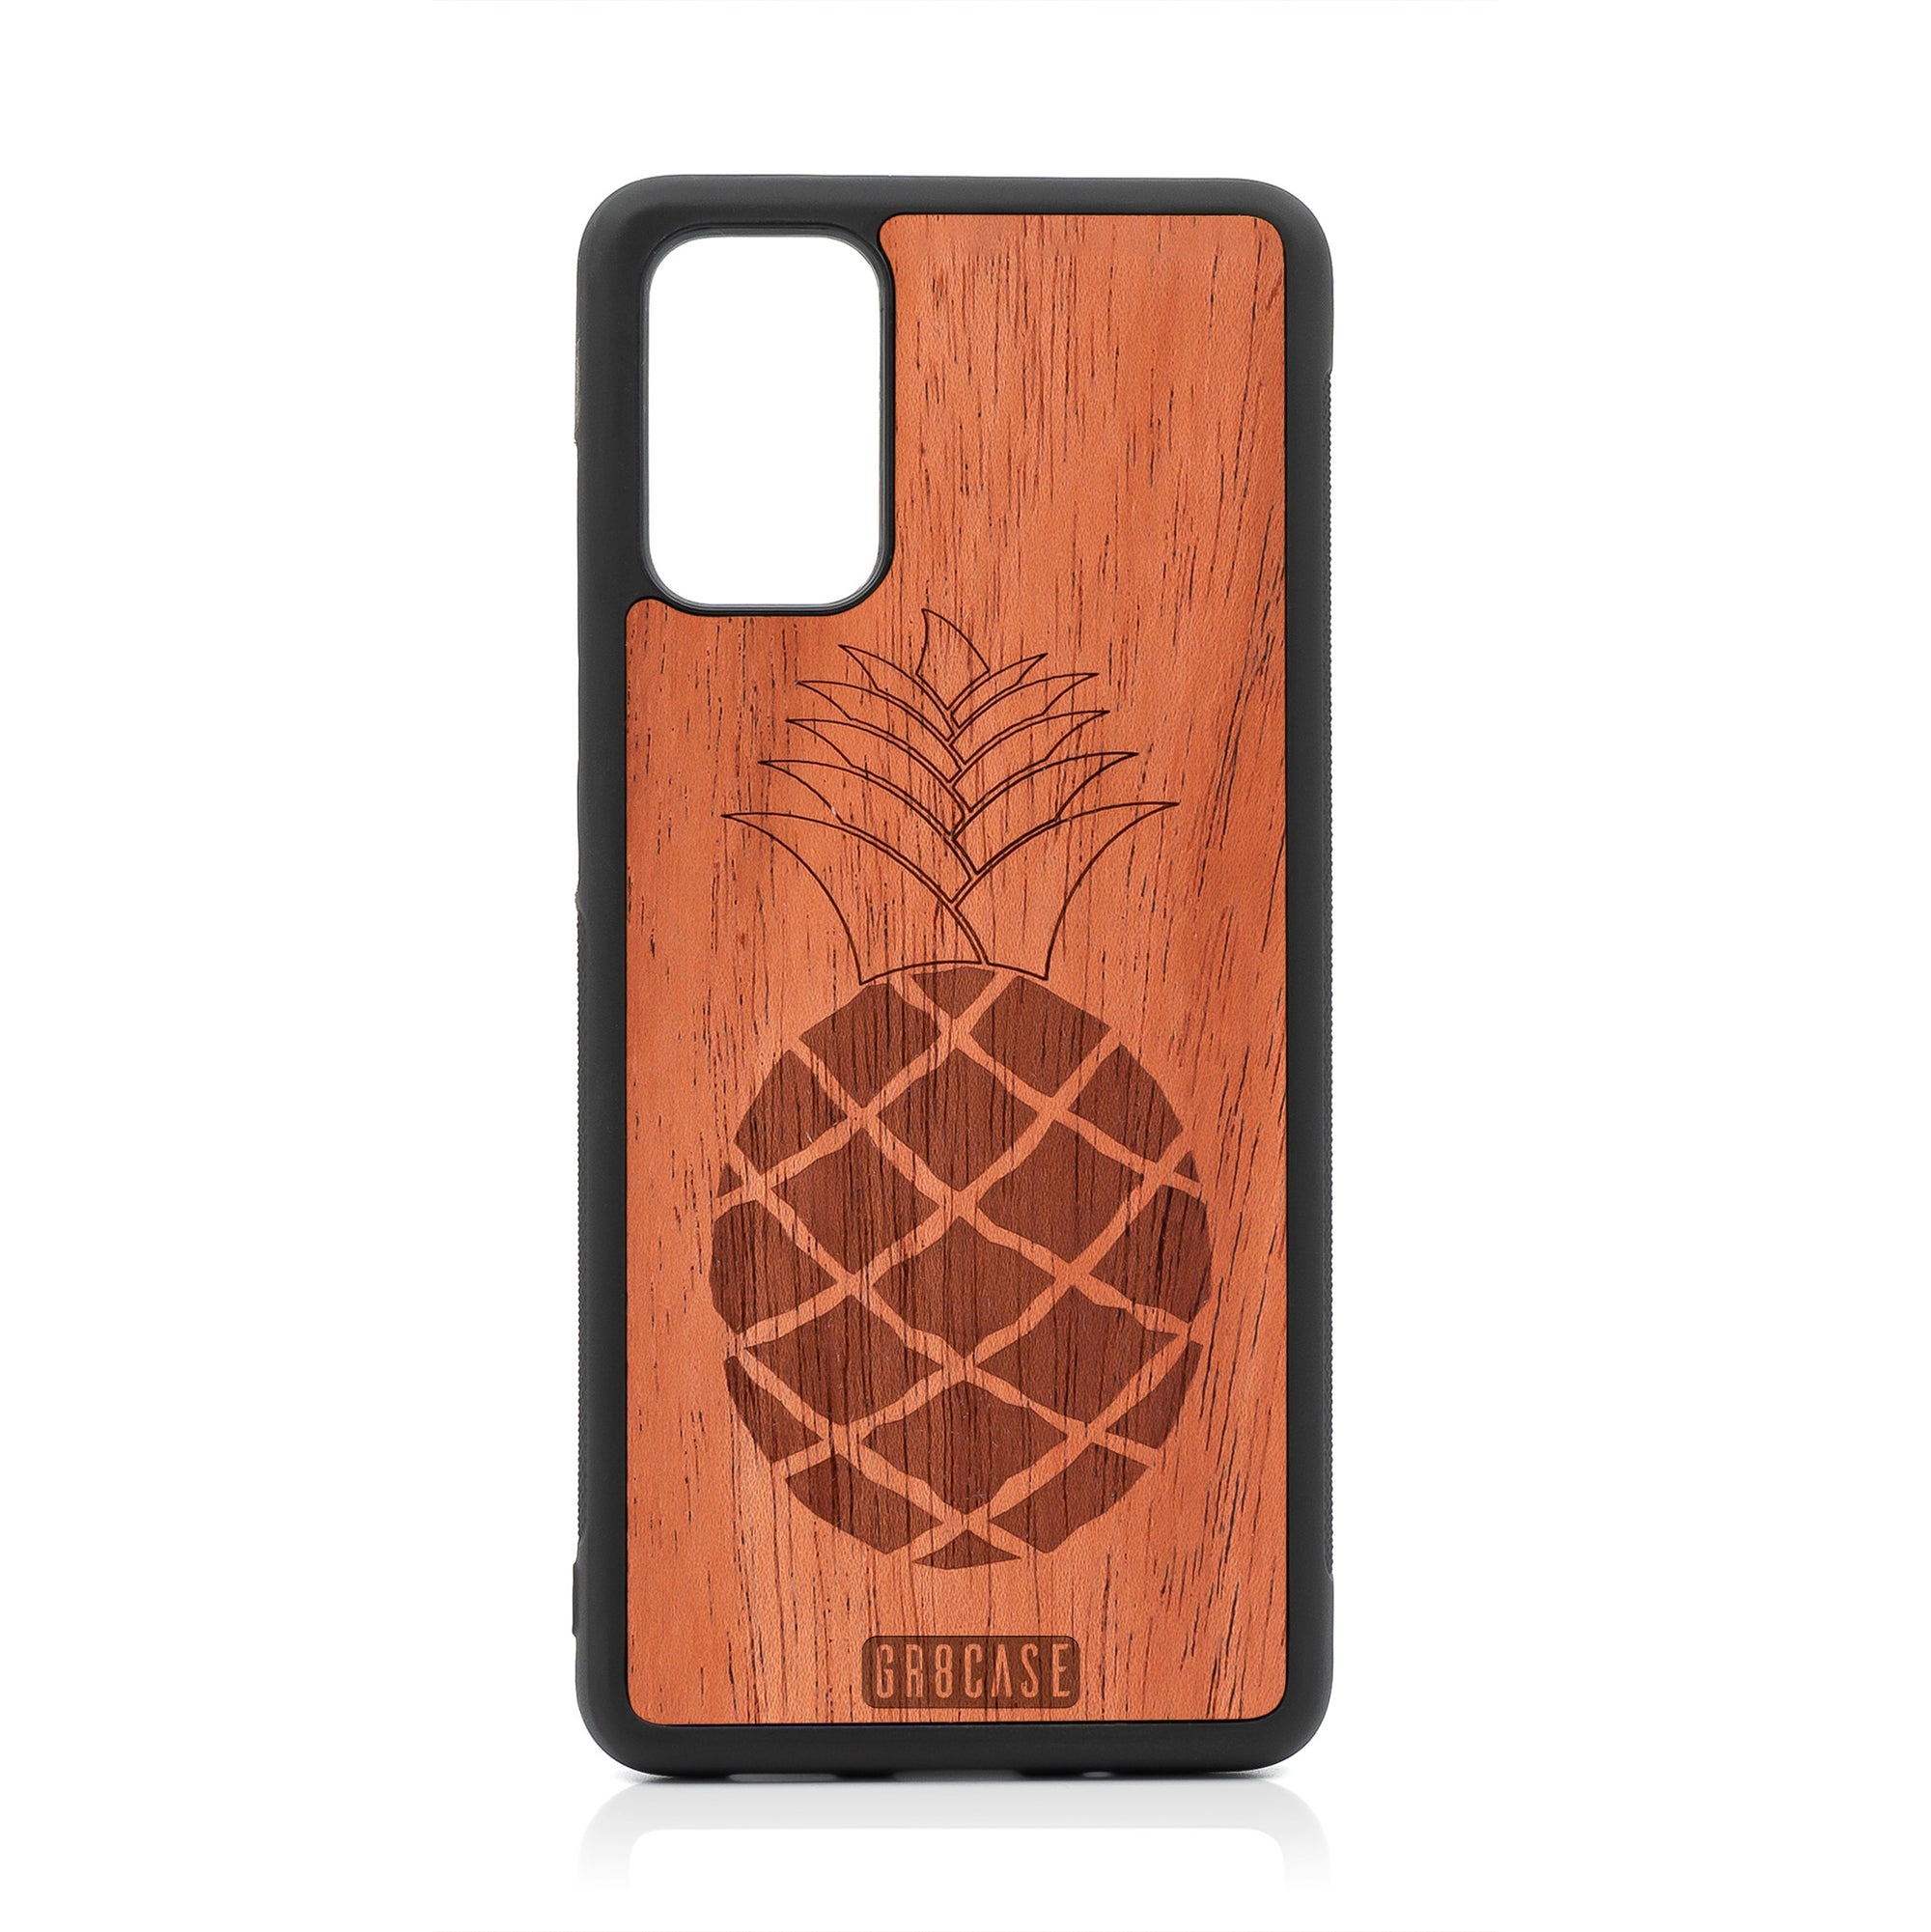 Pineapple Design Wood Case For Samsung Galaxy S20 Plus by GR8CASE